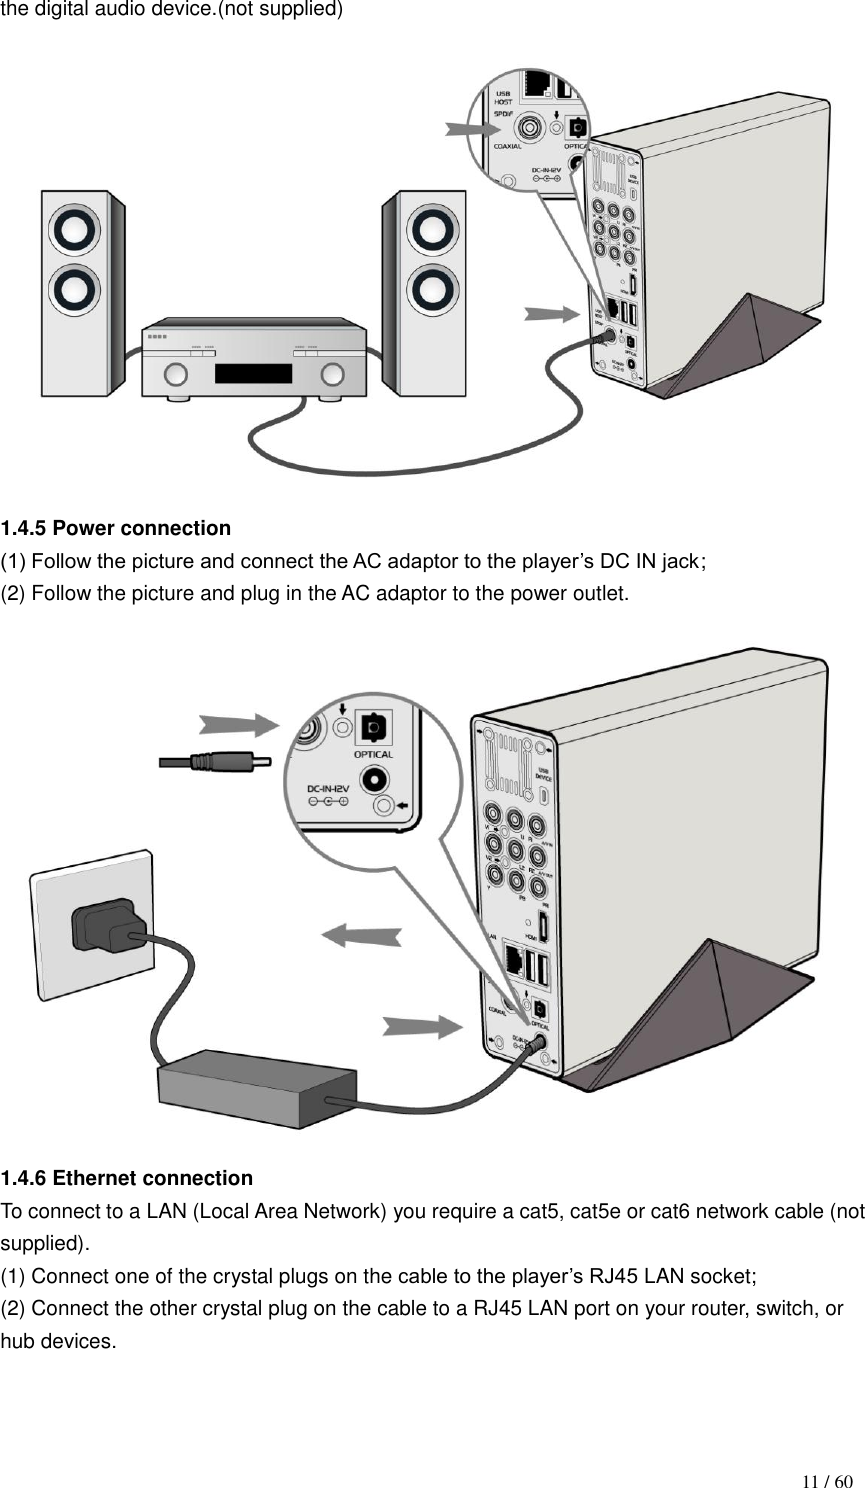                                           11 / 60 the digital audio device.(not supplied)  1.4.5 Power connection (1) Follow the picture and connect the AC adaptor to the player‟s DC IN jack; (2) Follow the picture and plug in the AC adaptor to the power outlet.  1.4.6 Ethernet connection To connect to a LAN (Local Area Network) you require a cat5, cat5e or cat6 network cable (not supplied). (1) Connect one of the crystal plugs on the cable to the player‟s RJ45 LAN socket; (2) Connect the other crystal plug on the cable to a RJ45 LAN port on your router, switch, or hub devices. 